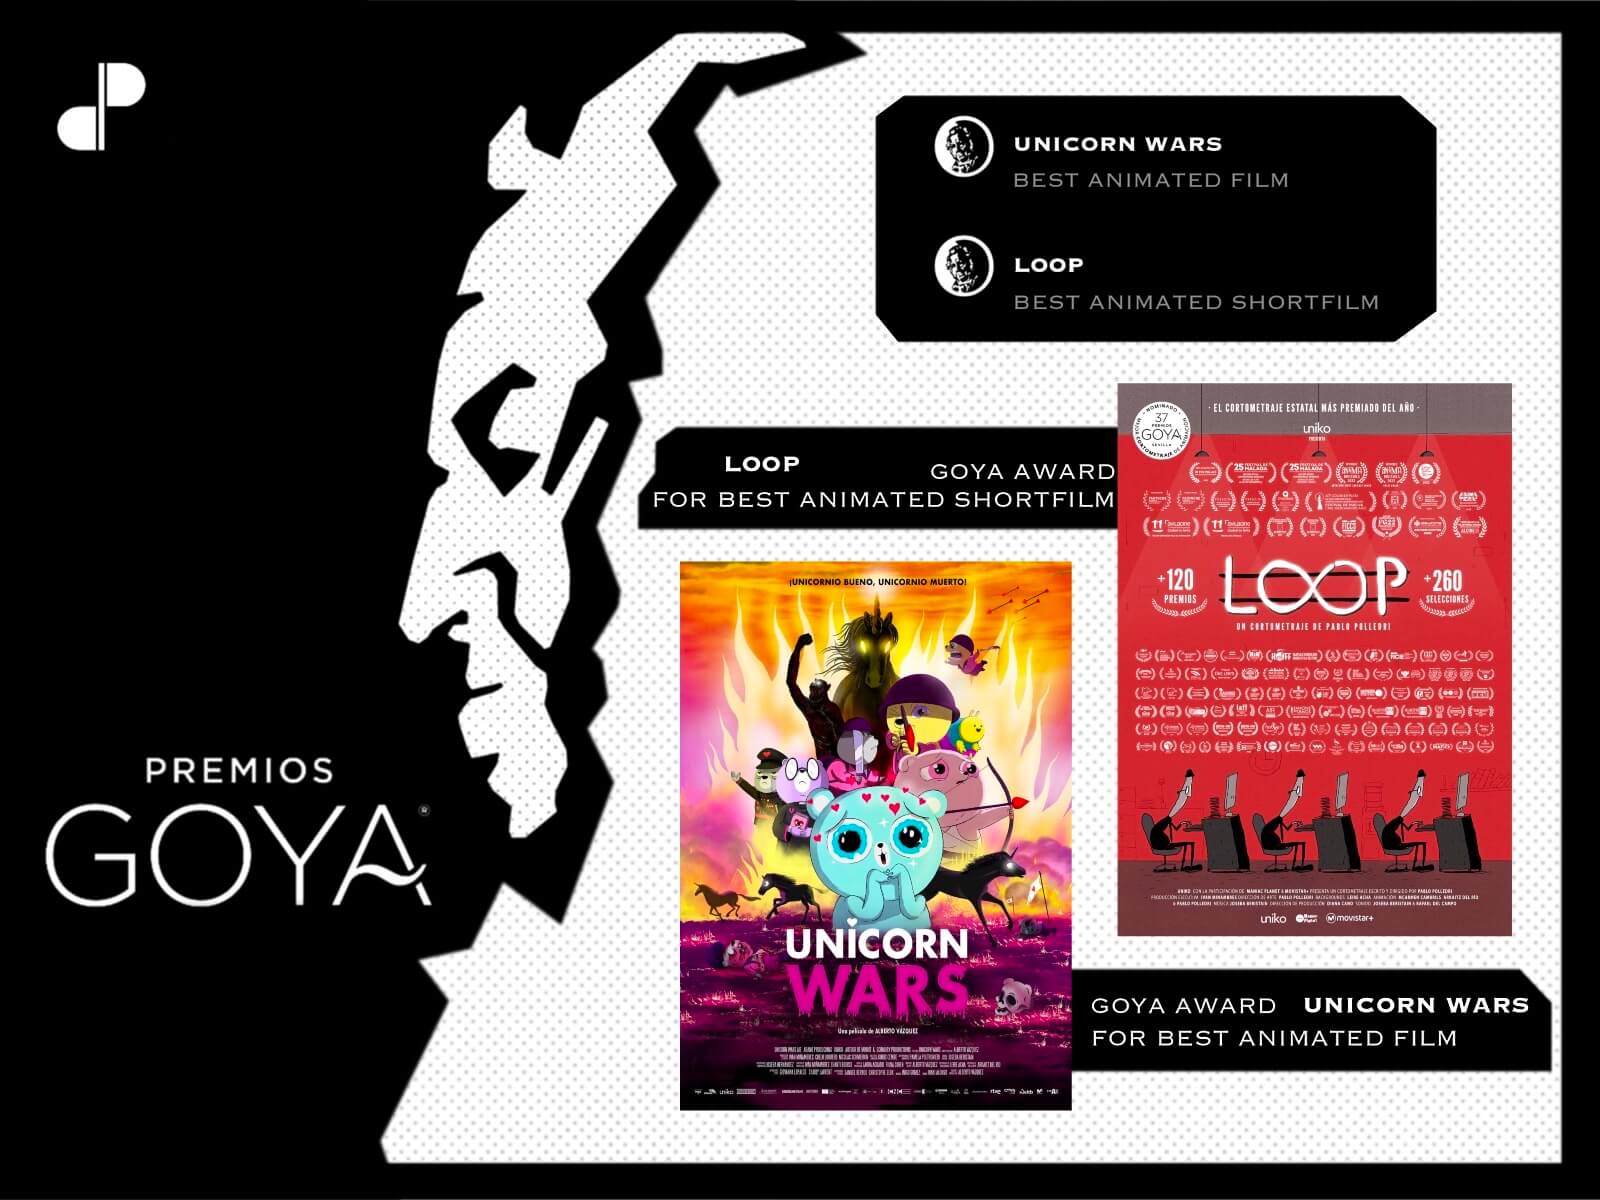 Goya Awards logo with animations Unicorn Wars and Loop posters offset to the side.